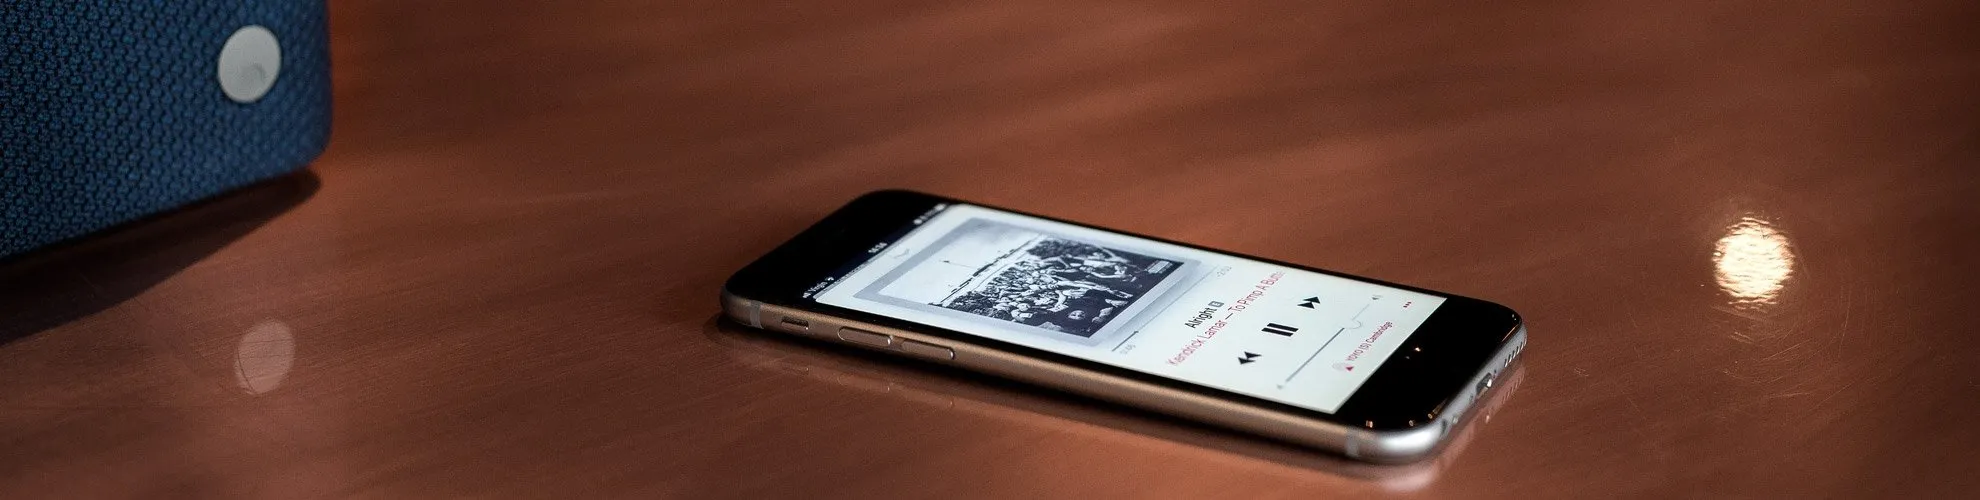 10 Apple Music Tips and Tricks you Might Not Know About